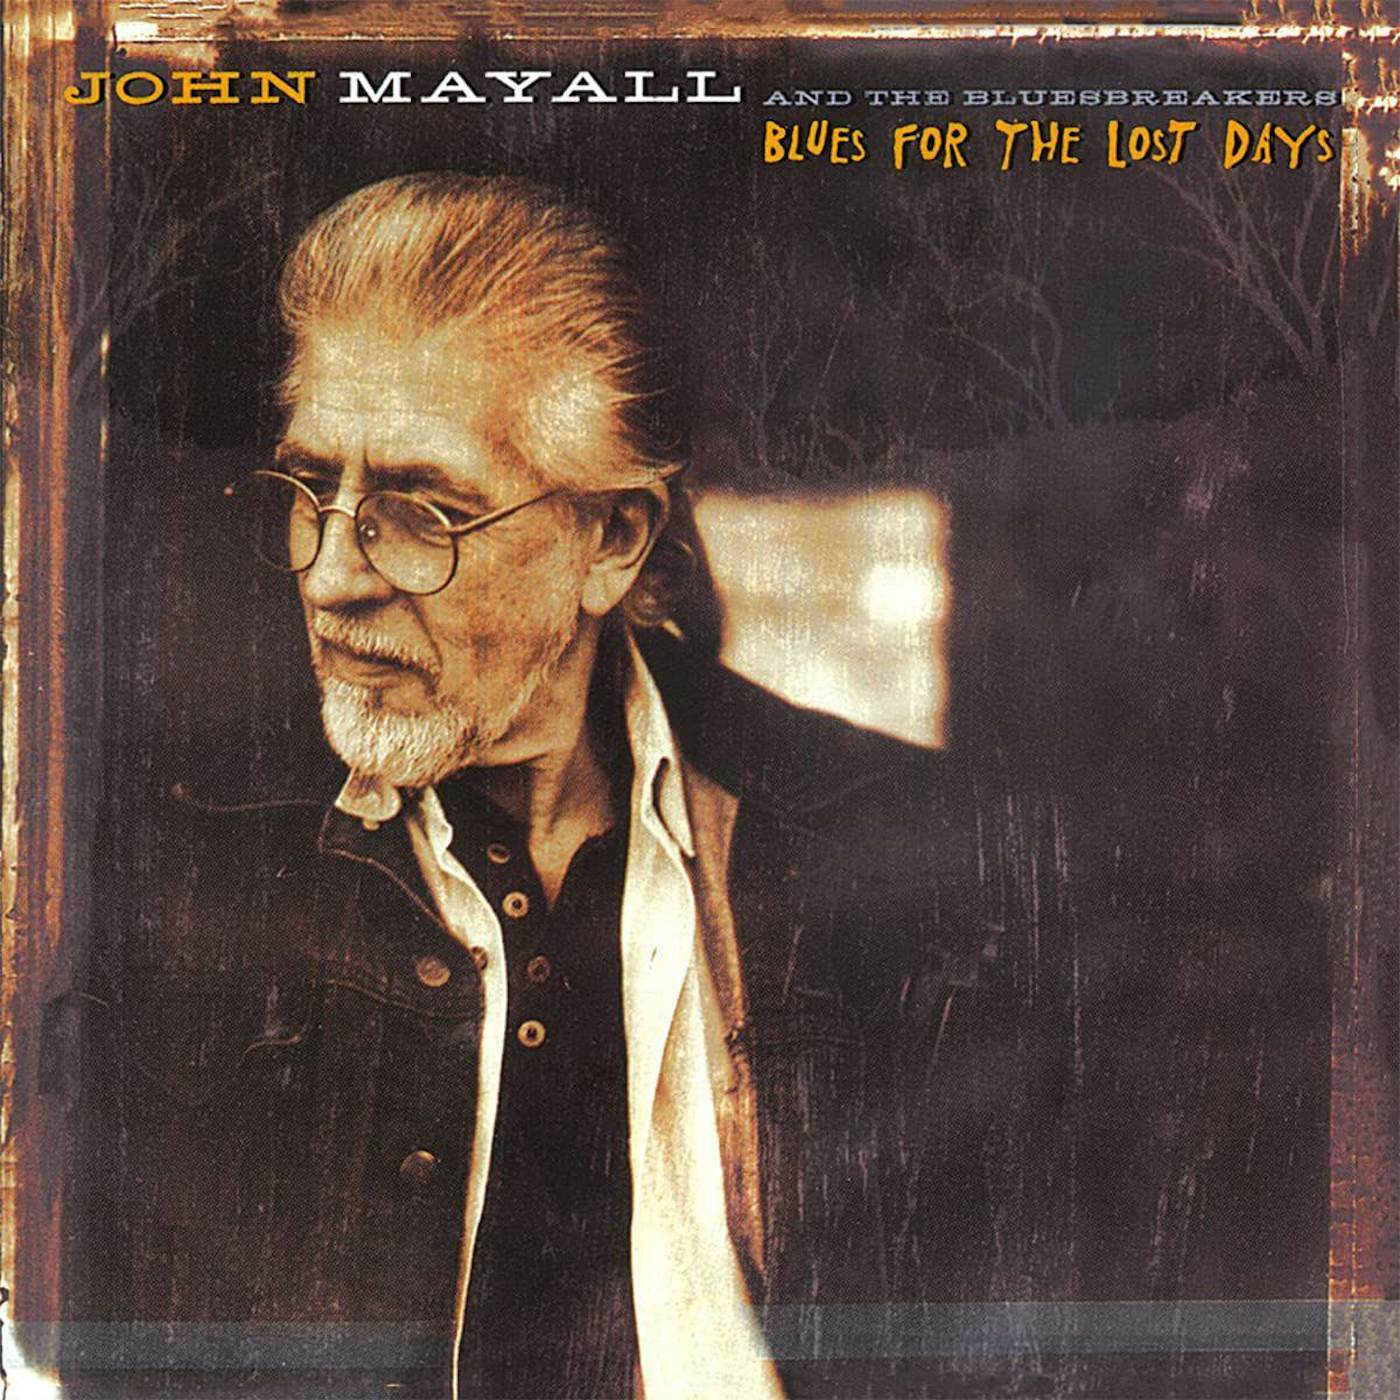 John Mayall & The Bluesbreakers Blues For The Lost Days (Green Marbled Vinyl/180g) Vinyl Record